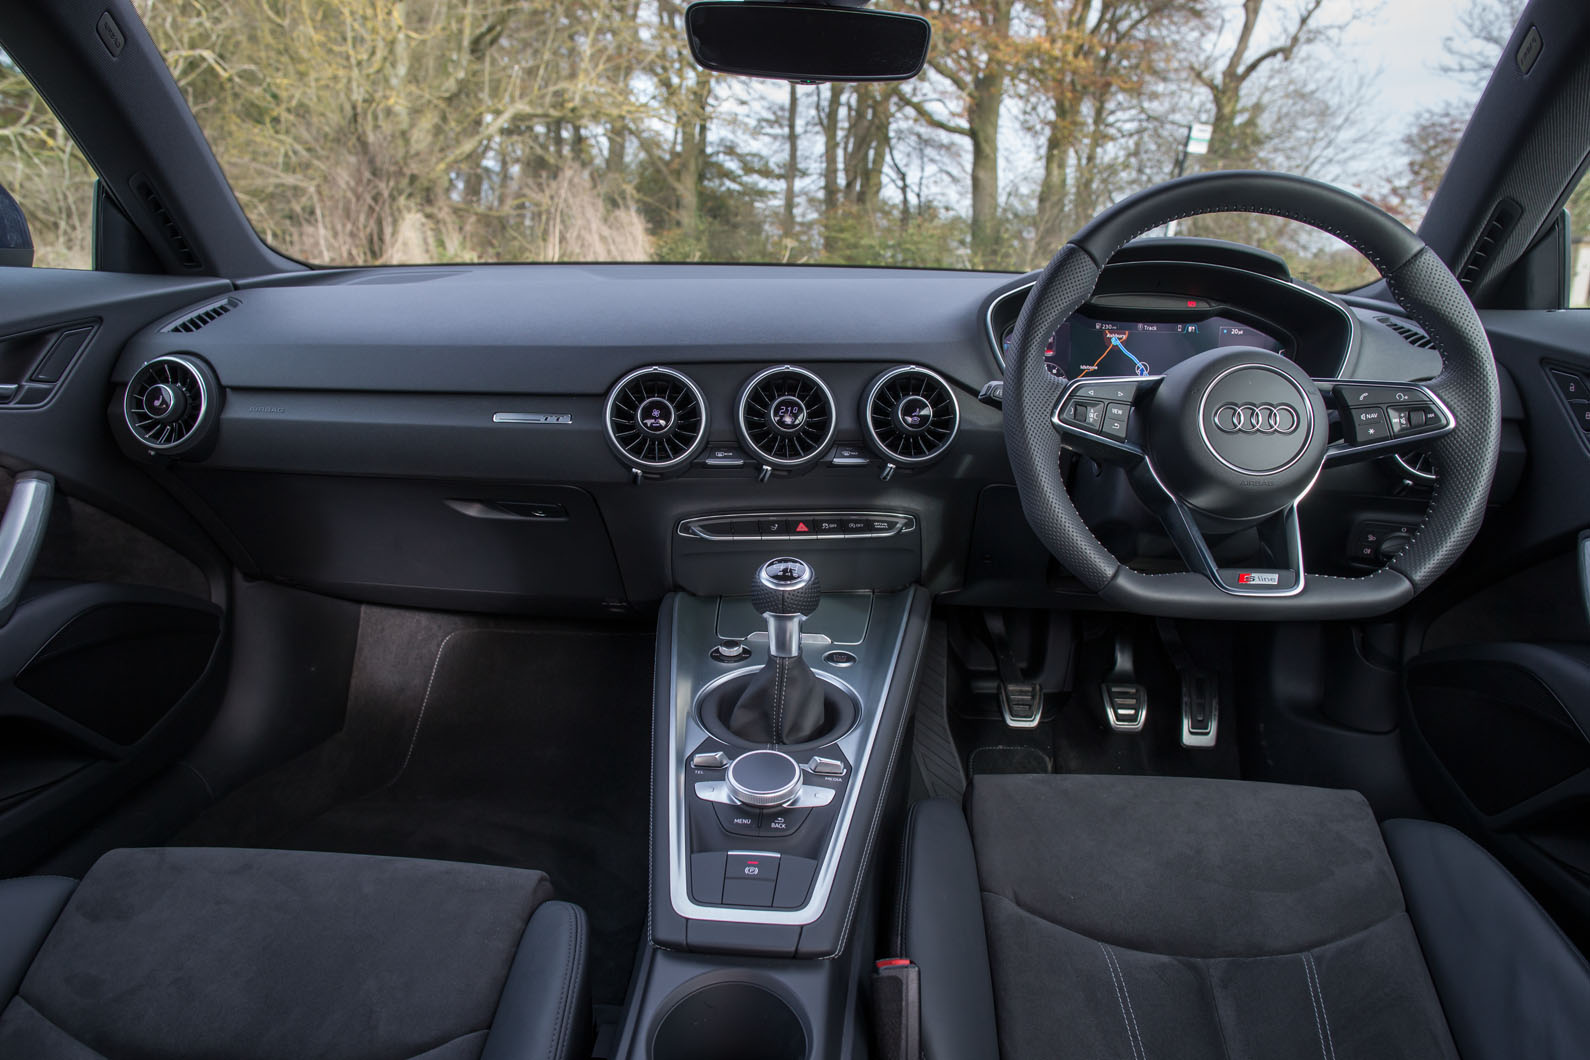 The view from the driver's seat in the Audi TT